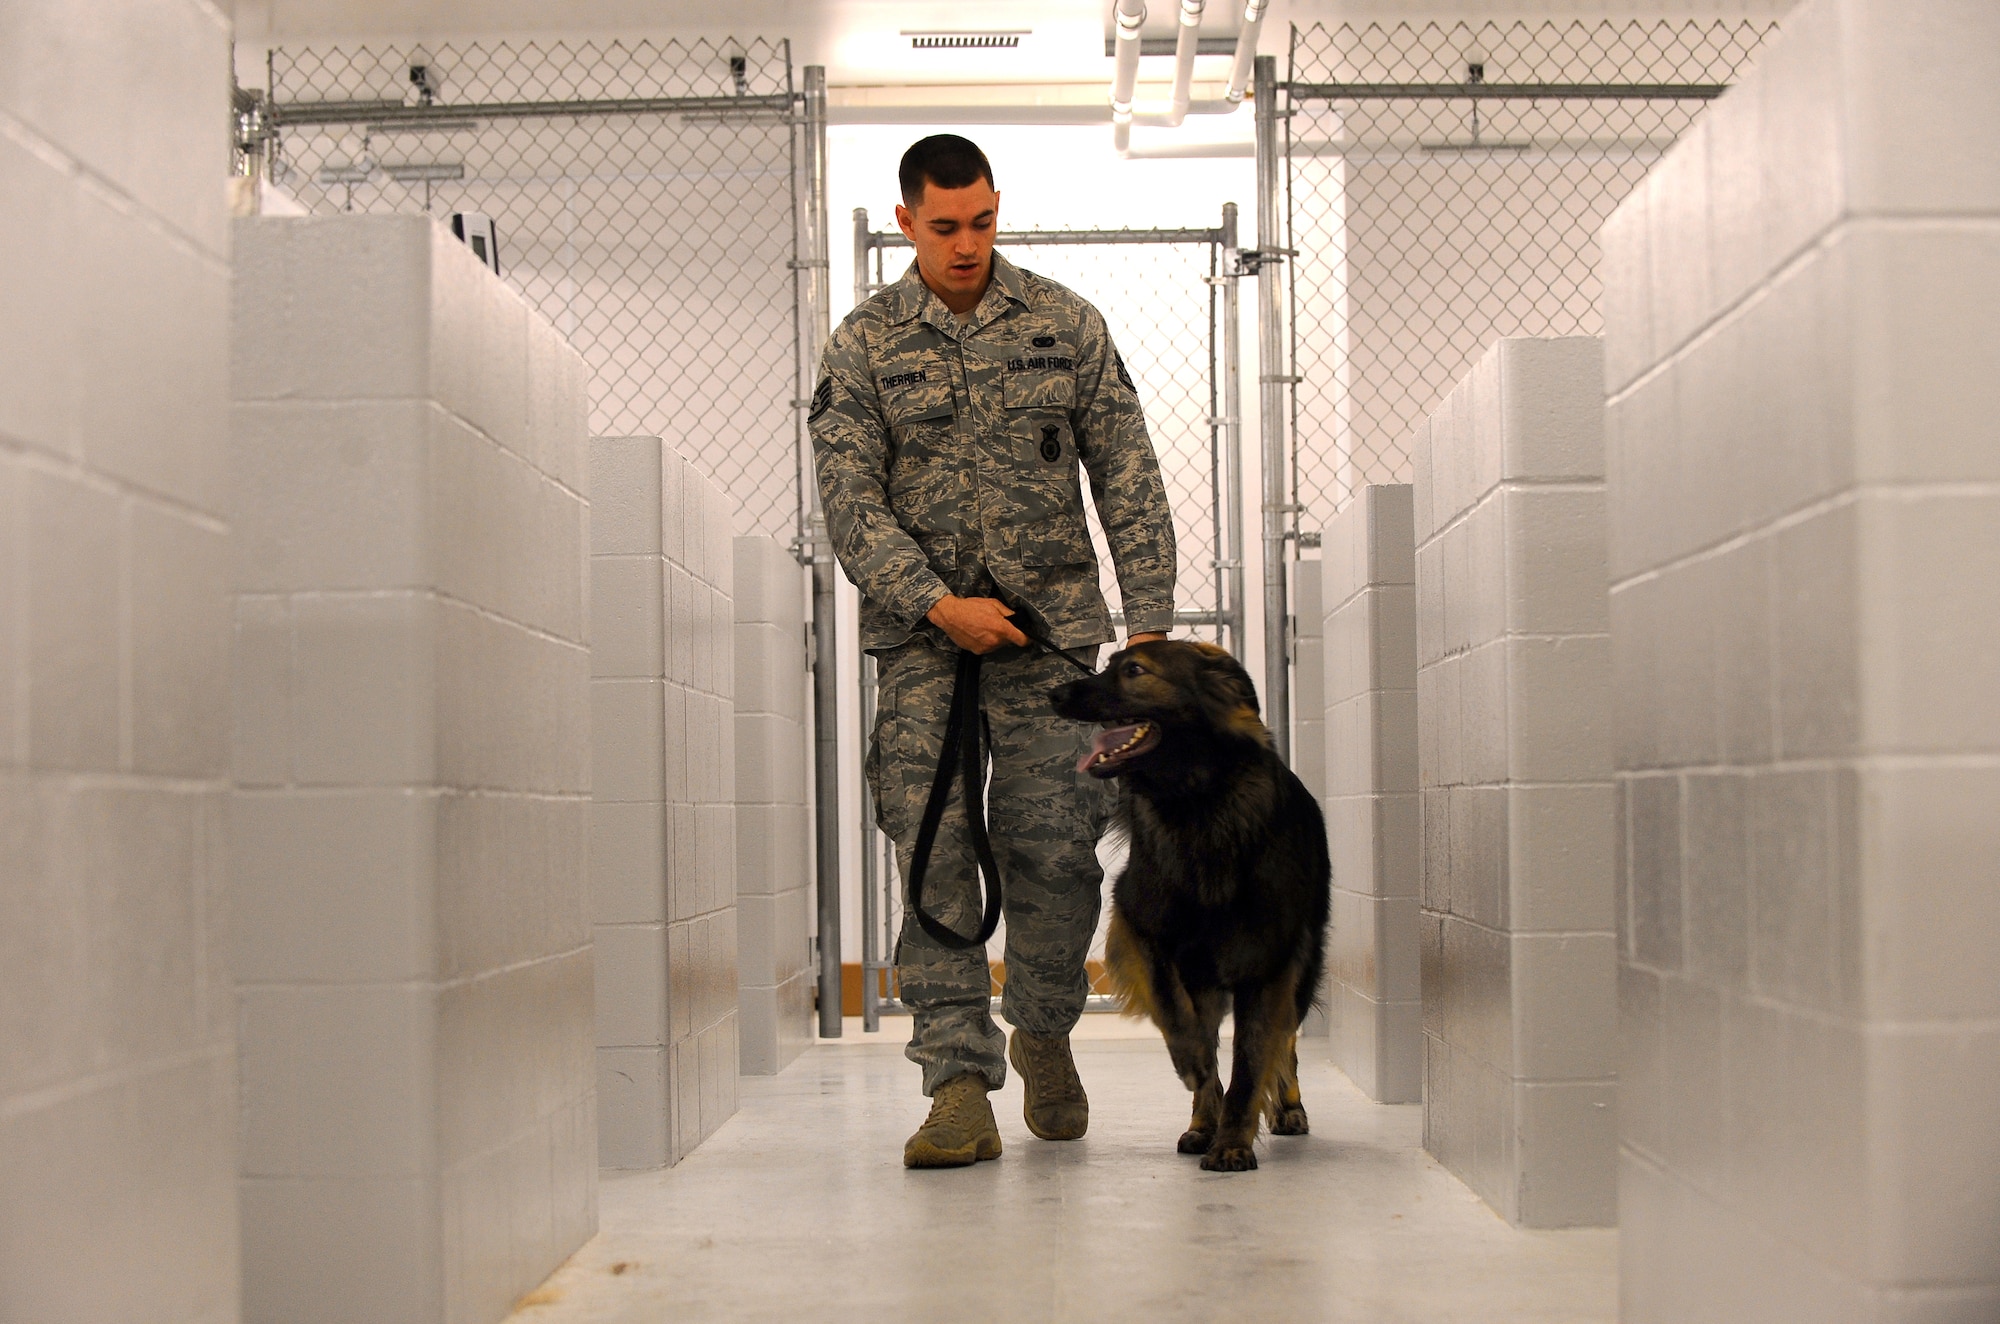 OFFUTT AIR FORCE BASE, Neb. - Staff Sgt. Joel Therrien, a military working dog handler with the 55th Security Forces Squadron, walks his dog and partner Dasty, an 80-pound Belgian Tervuren, from to his kennel to get his monthly bath and ear treatments. Regular cleanings of the dogs and their kennels keep the dogs healthy and mission ready. U.S. Air Force Photo by Josh Plueger (Released)